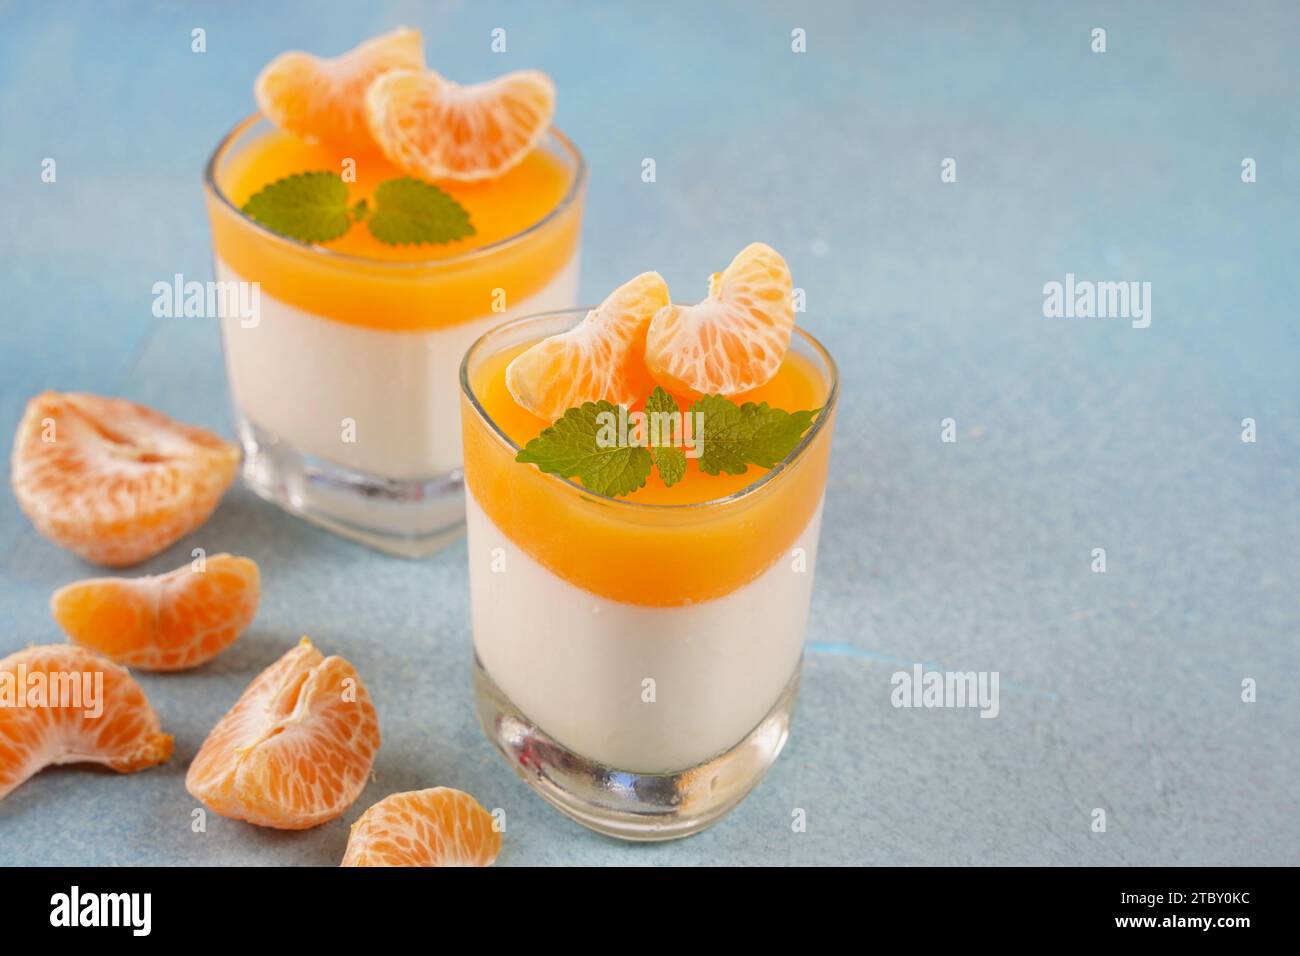 Vanilla panna cotta with tangerine layer in a small portioned vase and fruit pieces in wineglasses. Delicious Italian dessert. Stock Photo